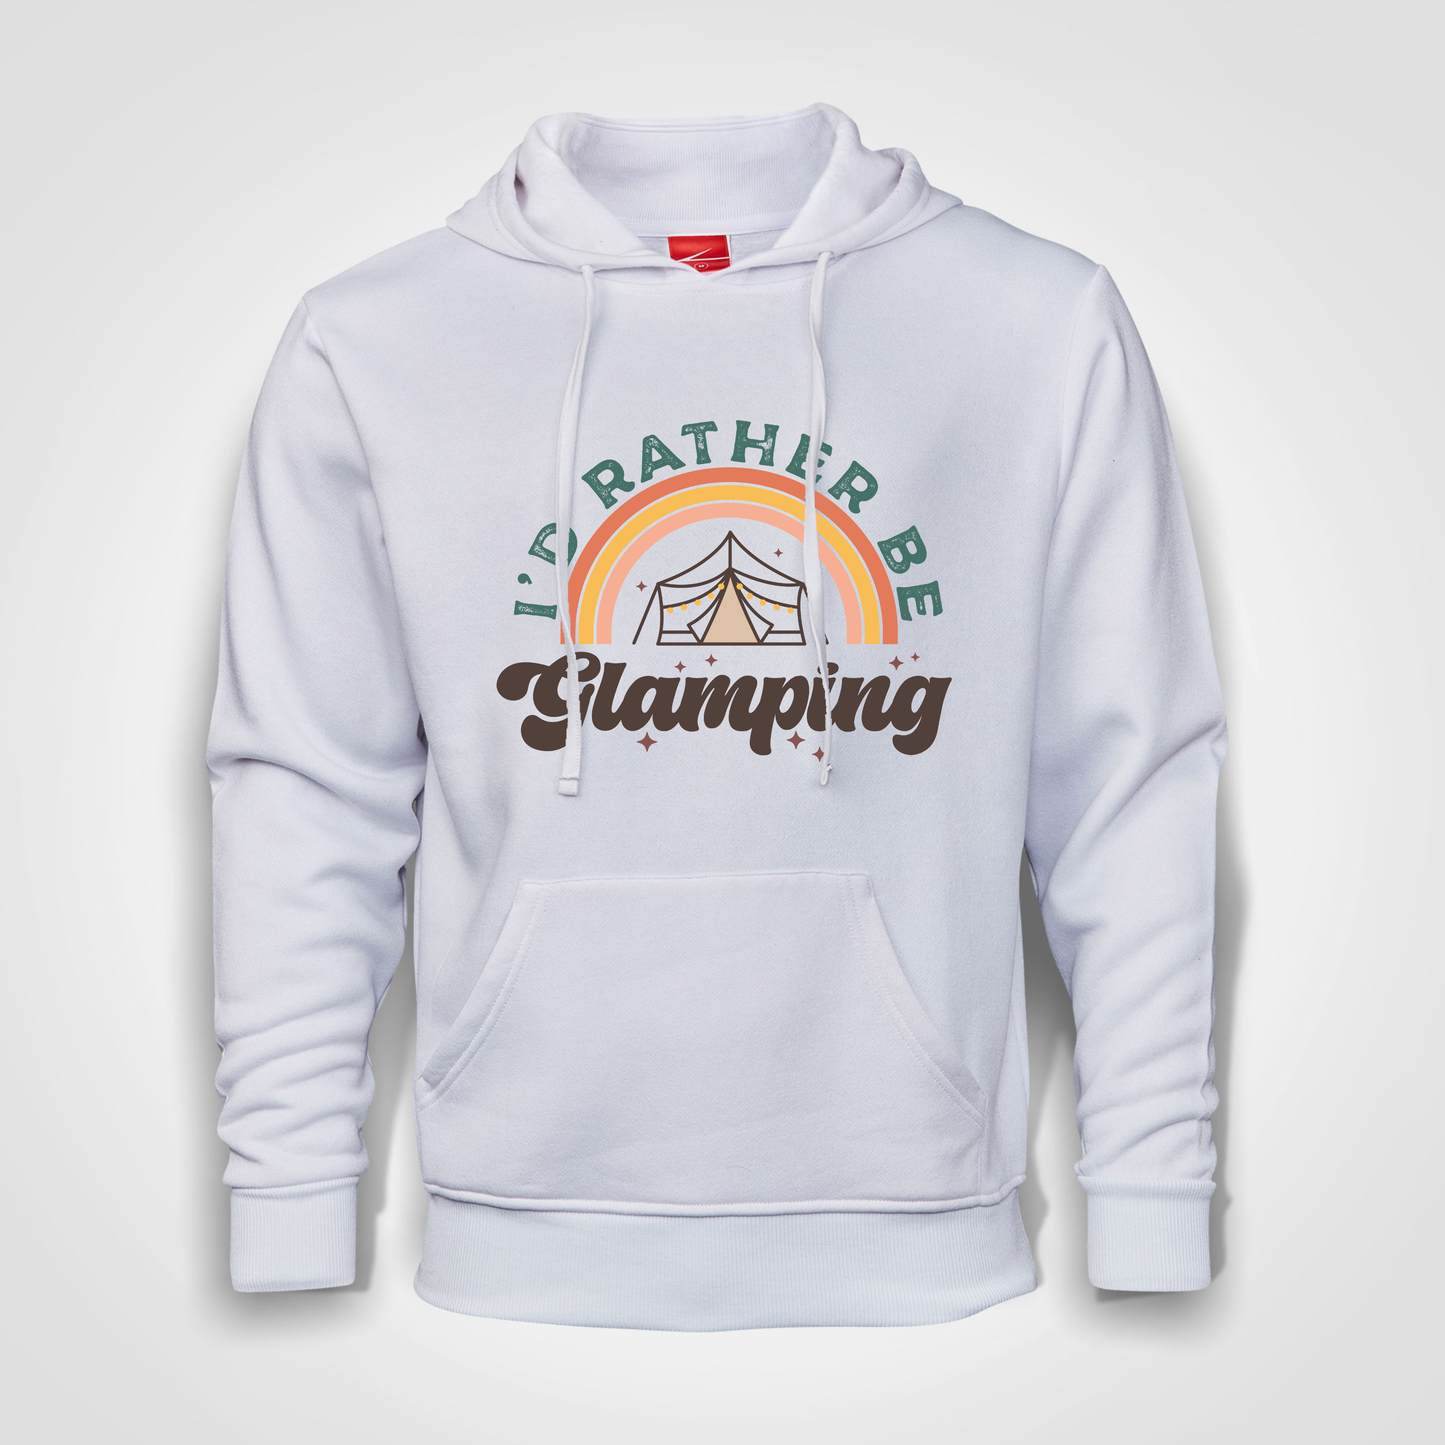 Hoodie - Camping I'd rather be glamping